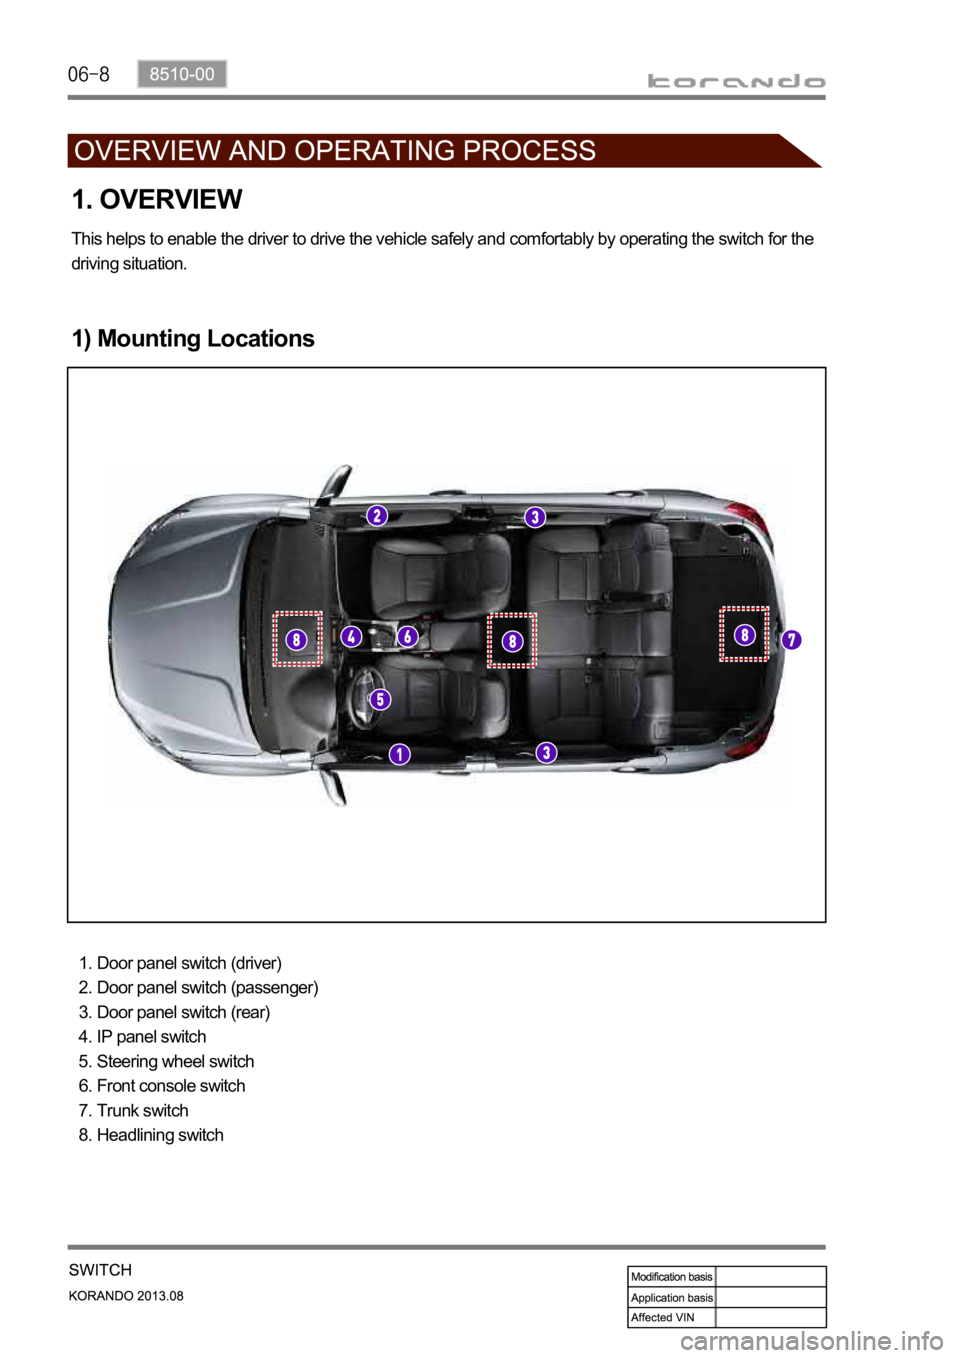 SSANGYONG KORANDO 2013 Owners Manual 1. OVERVIEW
1) Mounting Locations
Door panel switch (driver)
Door panel switch (passenger)
Door panel switch (rear)
IP panel switch
Steering wheel switch
Front console switch
Trunk switch
Headlining s